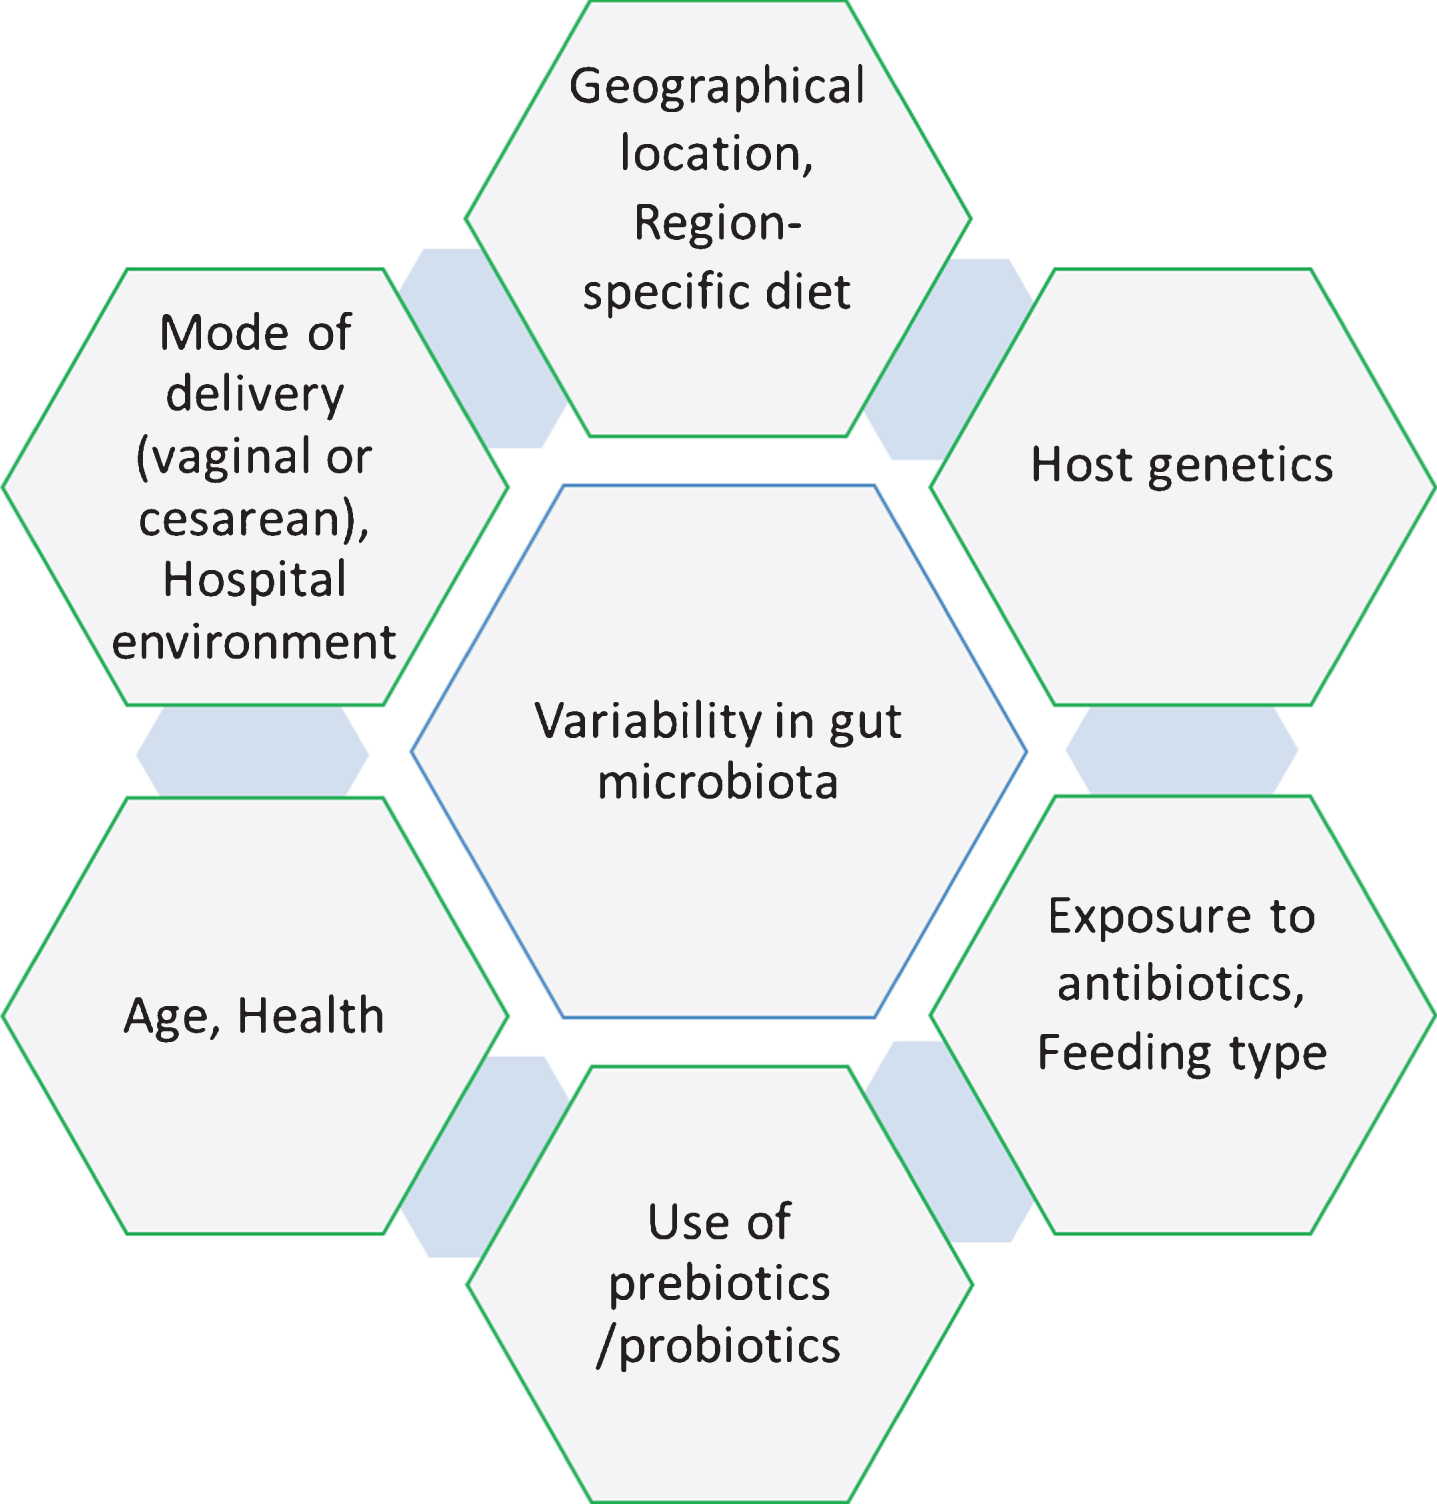 Factors responsible for inducing the variability in the human gut microbiota.